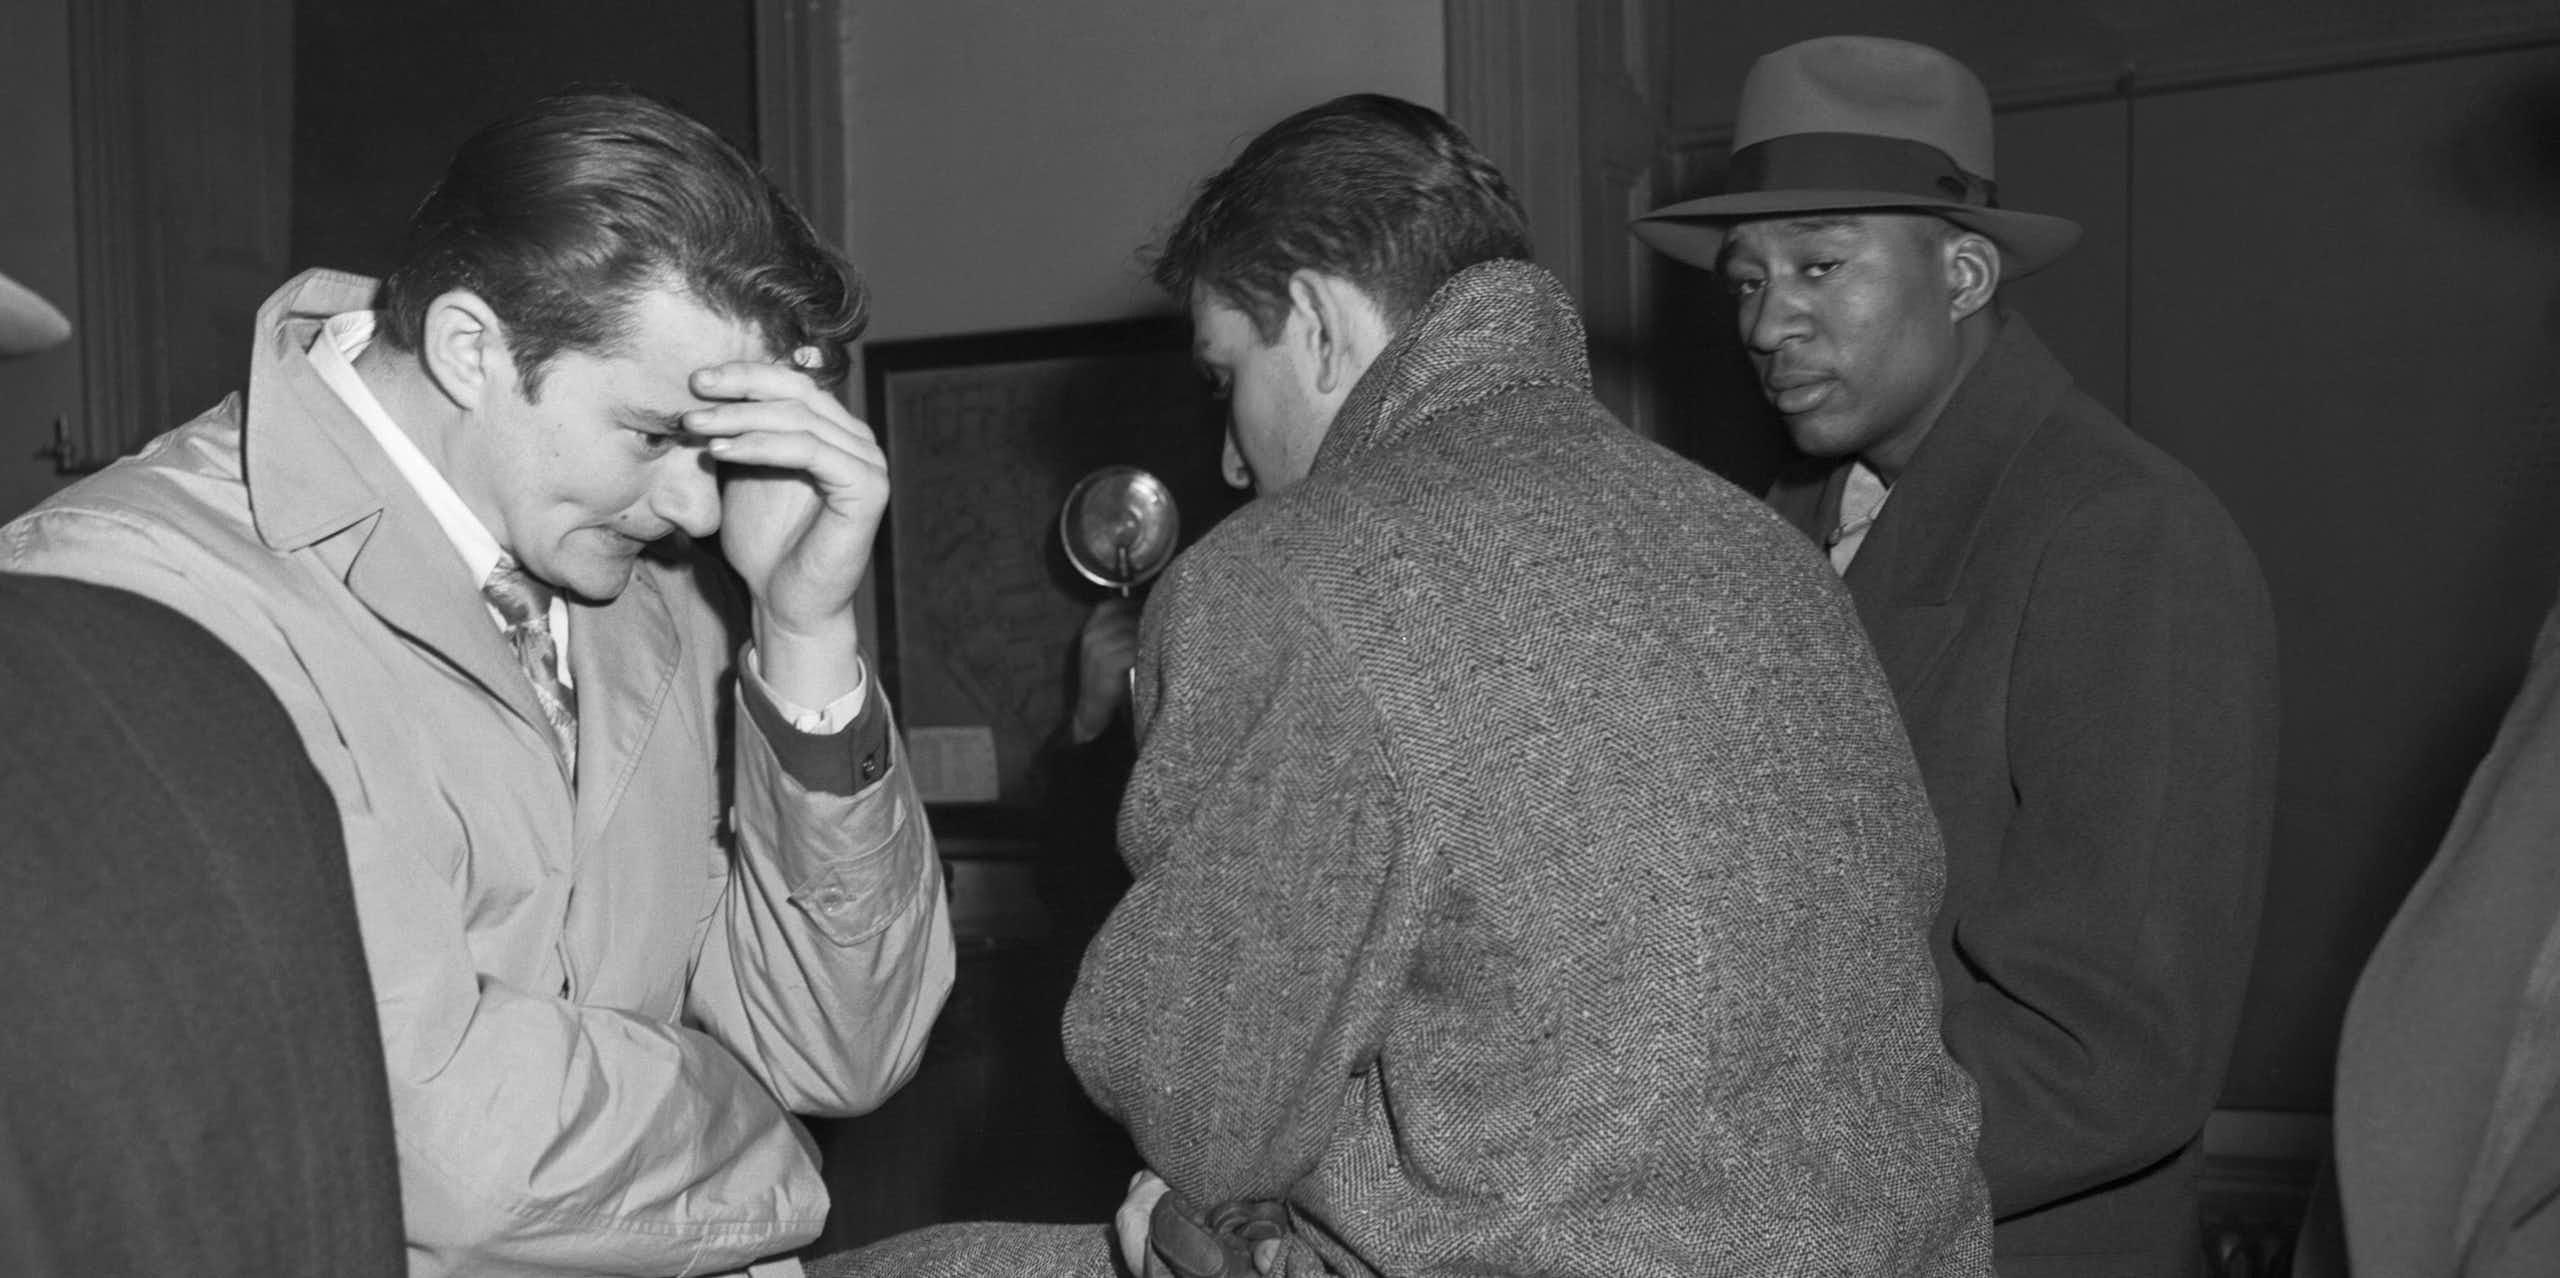 Three young men -- one hiding his face behind his hand in apparent shame, another looking warily at the photographer -- are seen waiting in a police station.